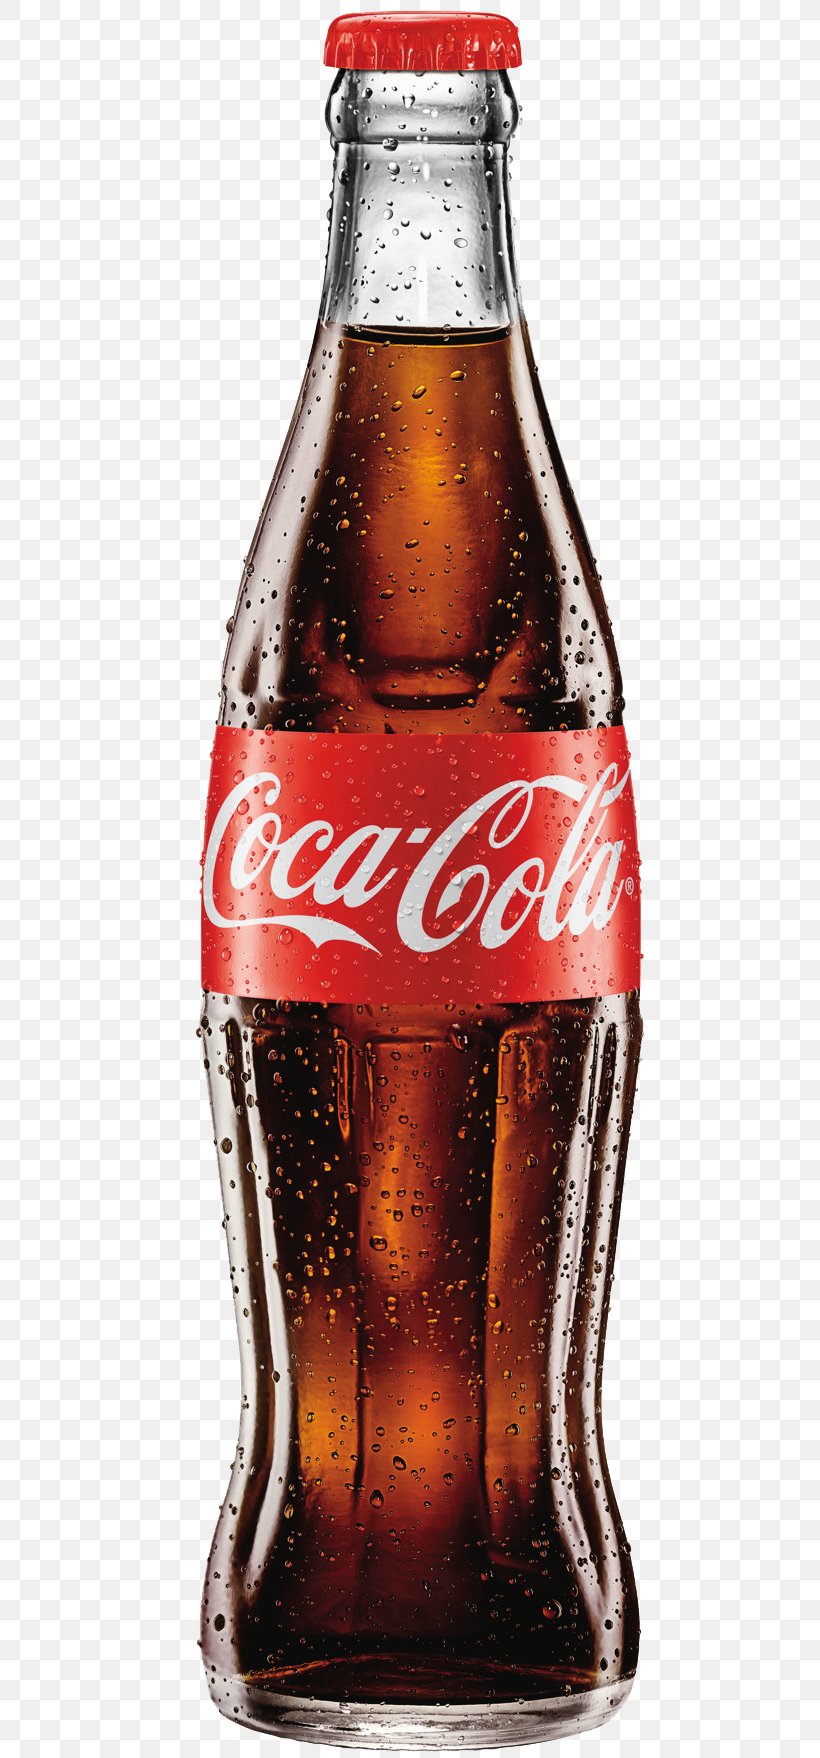 Caffeine-Free Coca-Cola Soft Drink, PNG, 600x1758px, Coca Cola, Beer Bottle, Bottle, Caffeine Free Coca Cola, Carbonated Soft Drinks Download Free